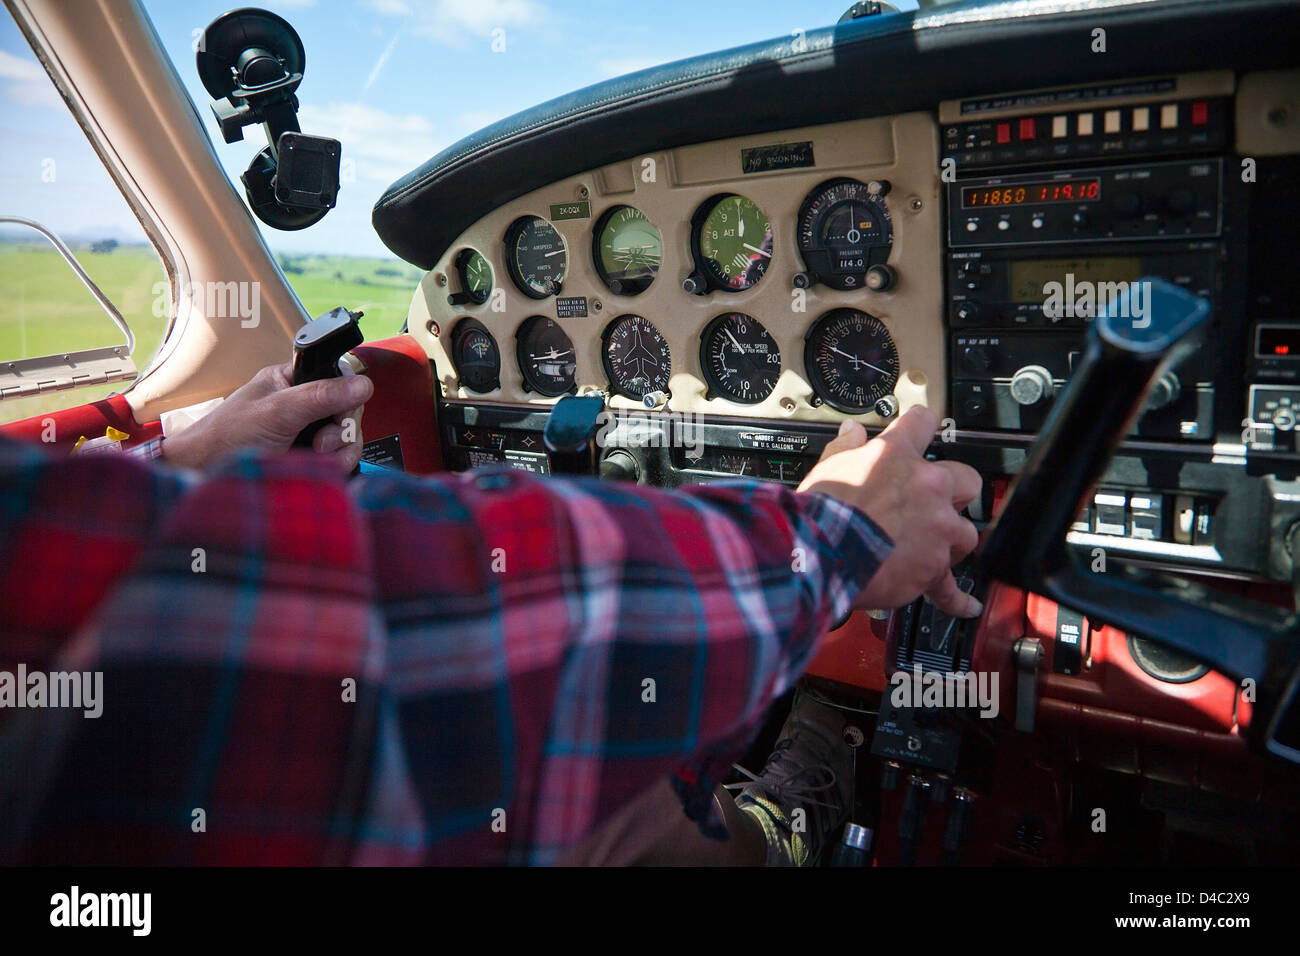 A pilot at the controls of a light aircraft, taxiing and preparing for take off. Stock Photo